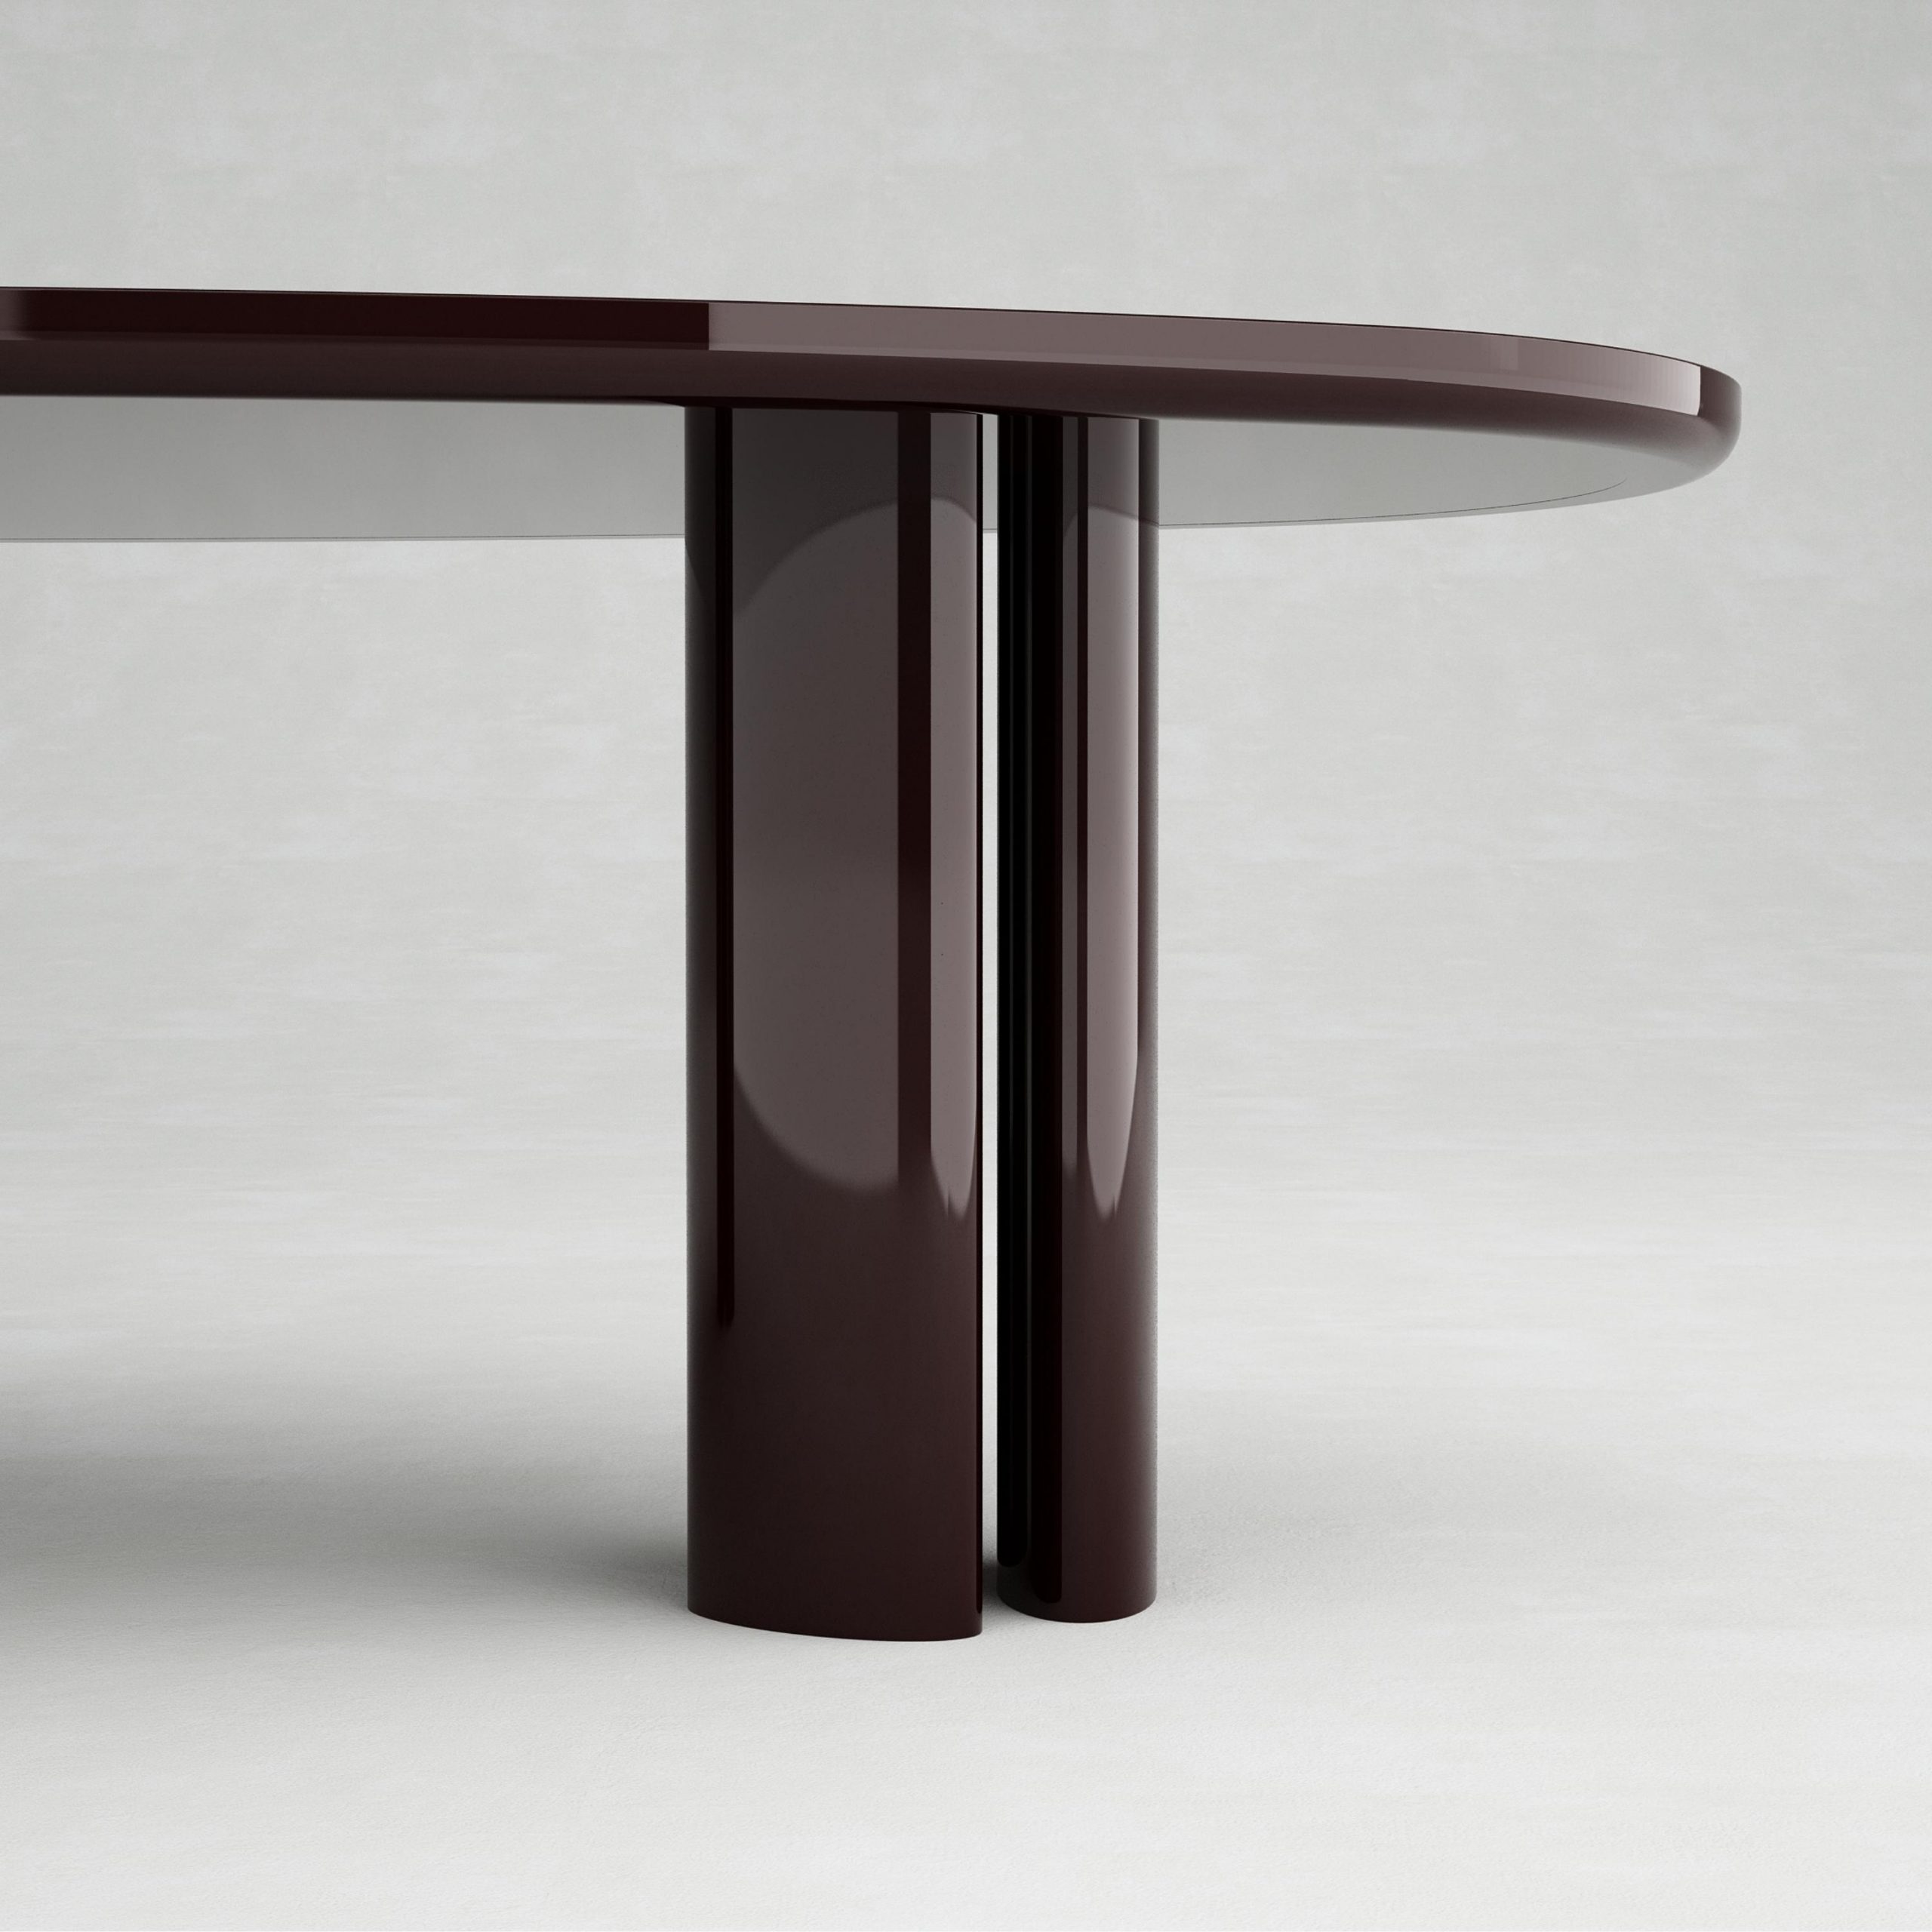 Invisible The Burgundy Collection Lacquer Francesco Table Swan Balzano Dining